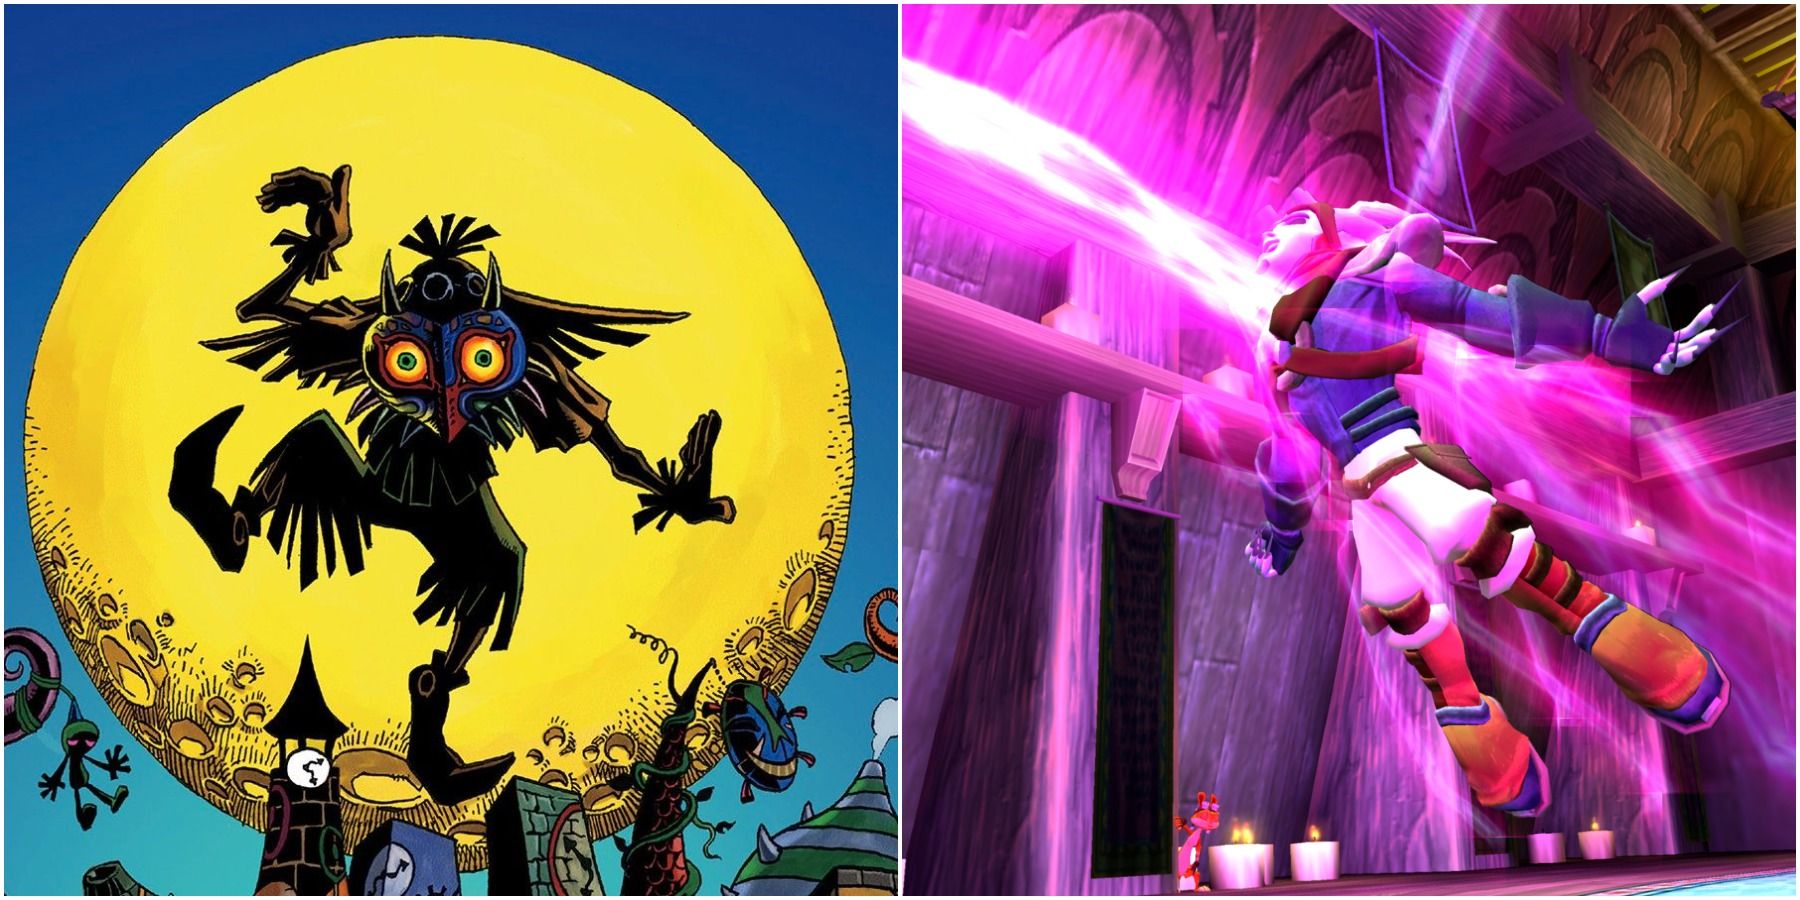 (Left) Skull kid in front of the moon (Right) Jak being zapped